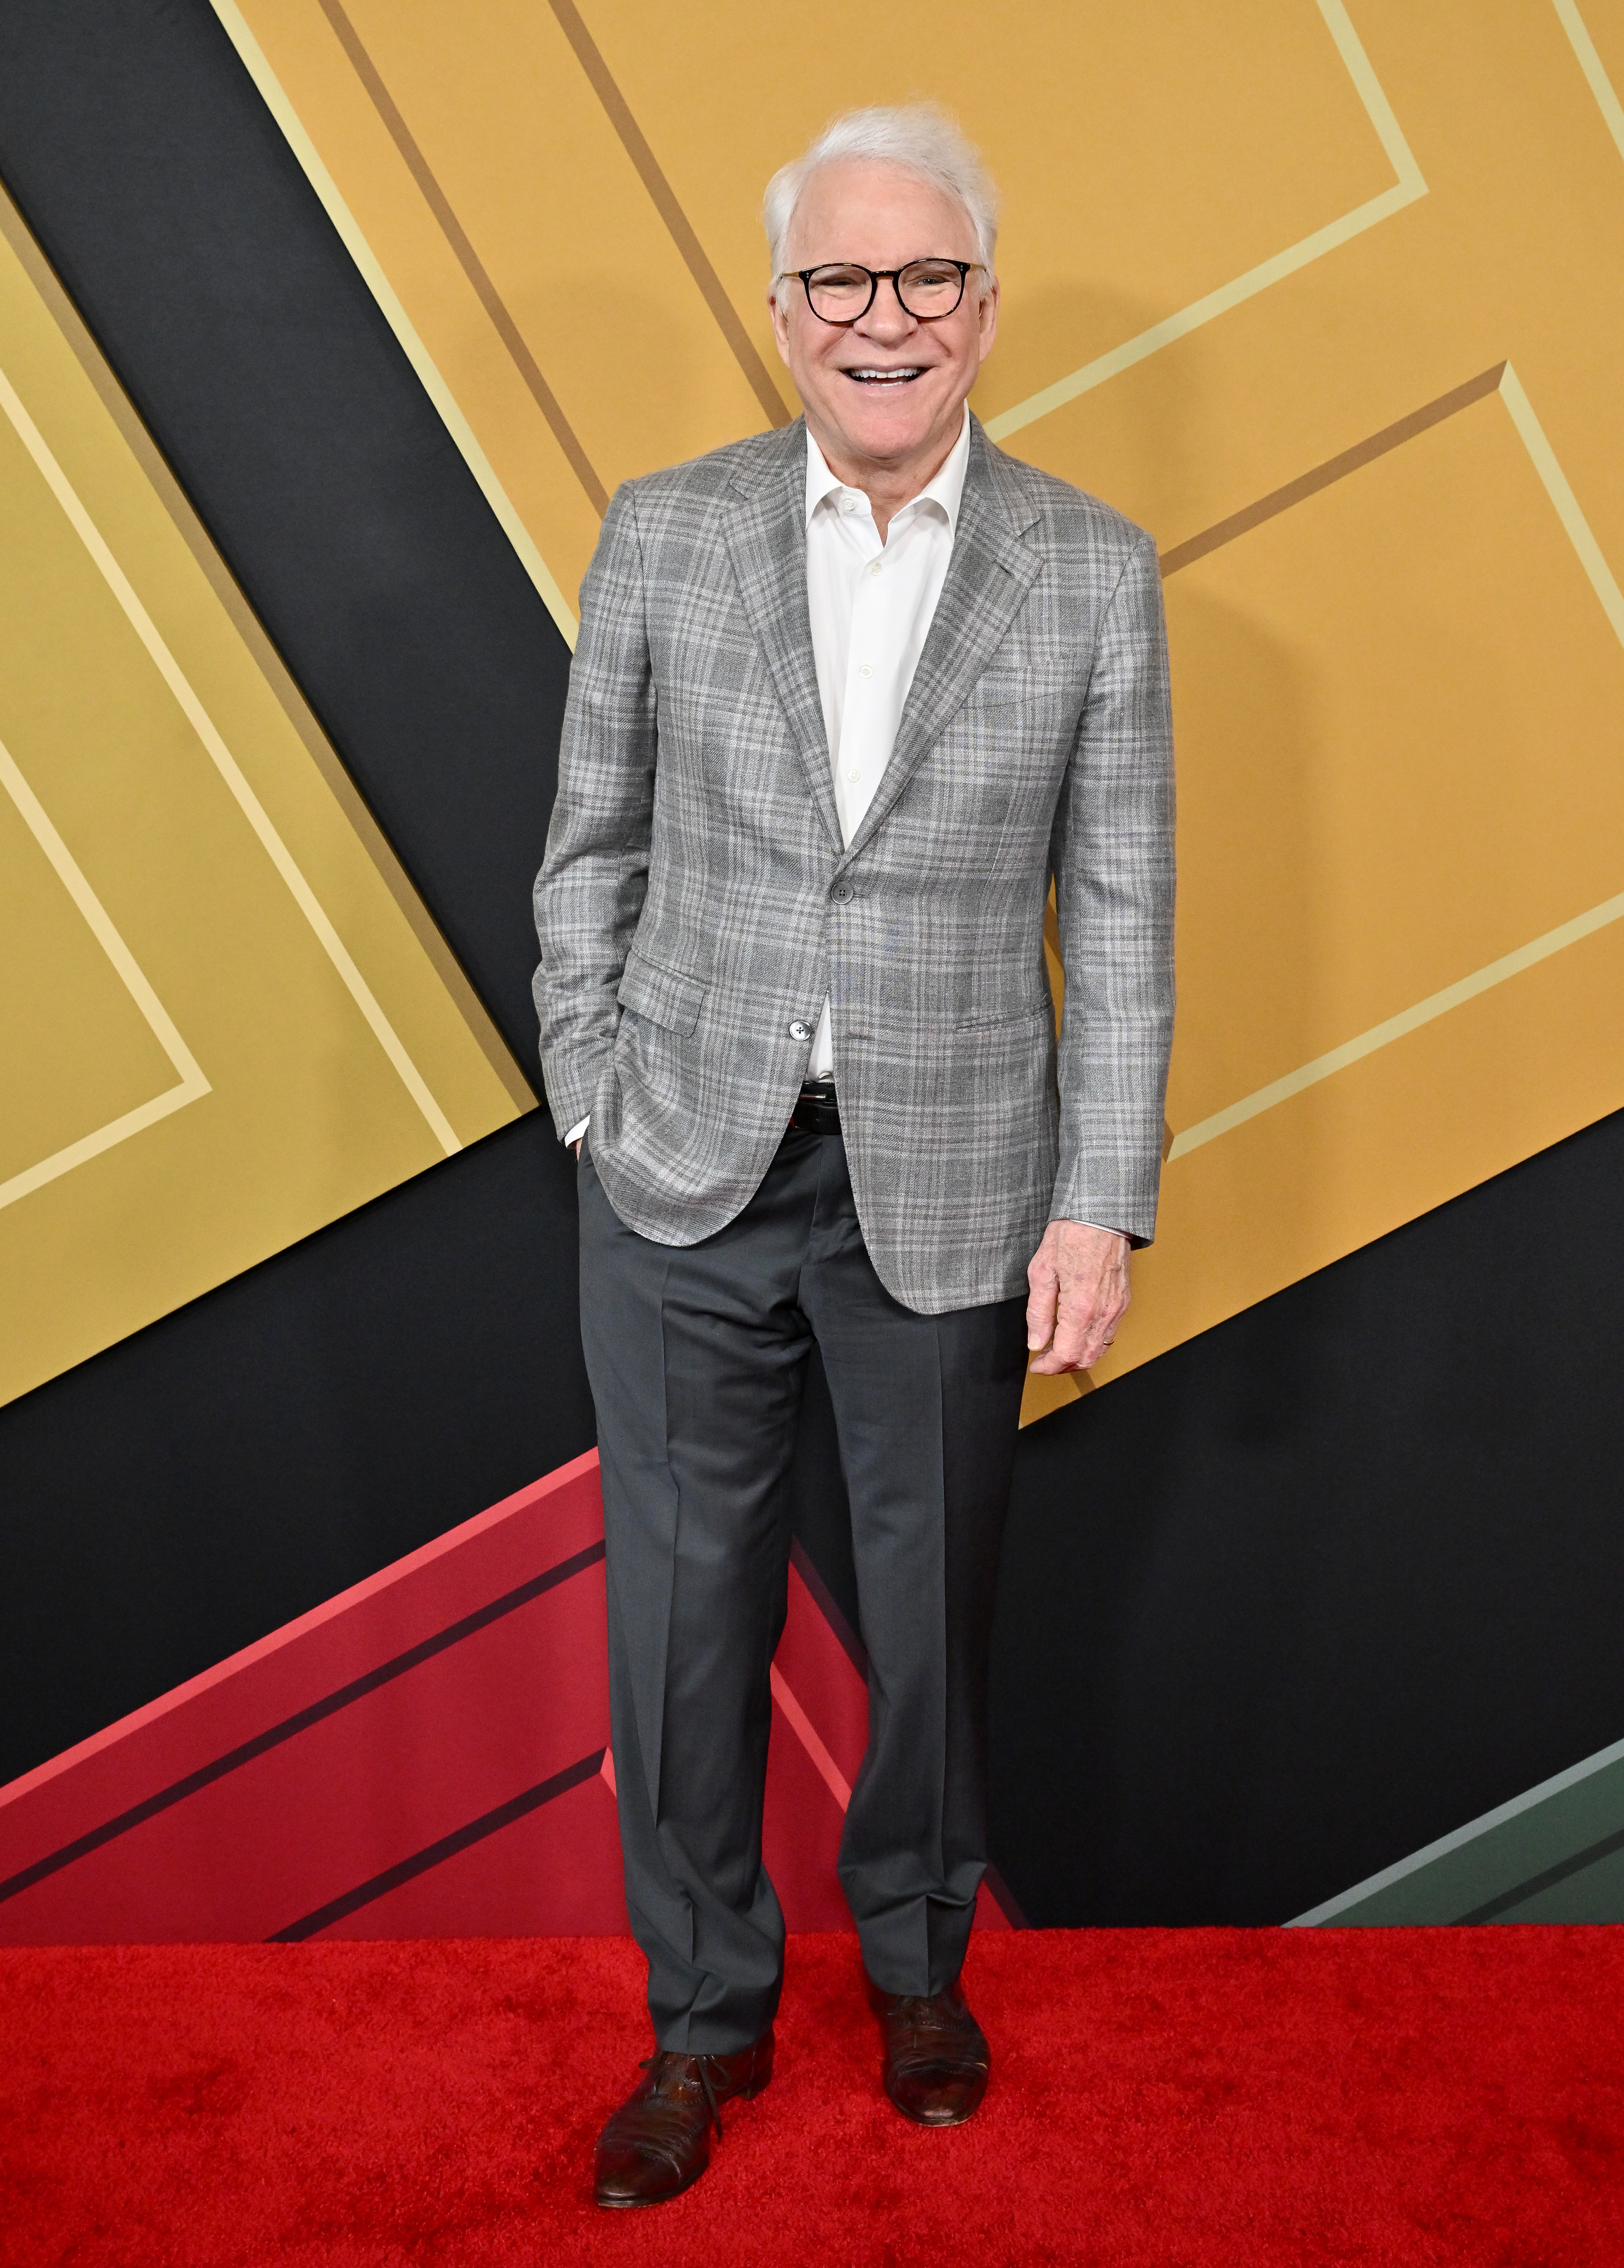 Steve Martin attends the premiere of "Only Murders In The Building" Season 2 at DGA Theater Complex in Los Angeles, California, on June 27, 2022. | Source: Getty Images